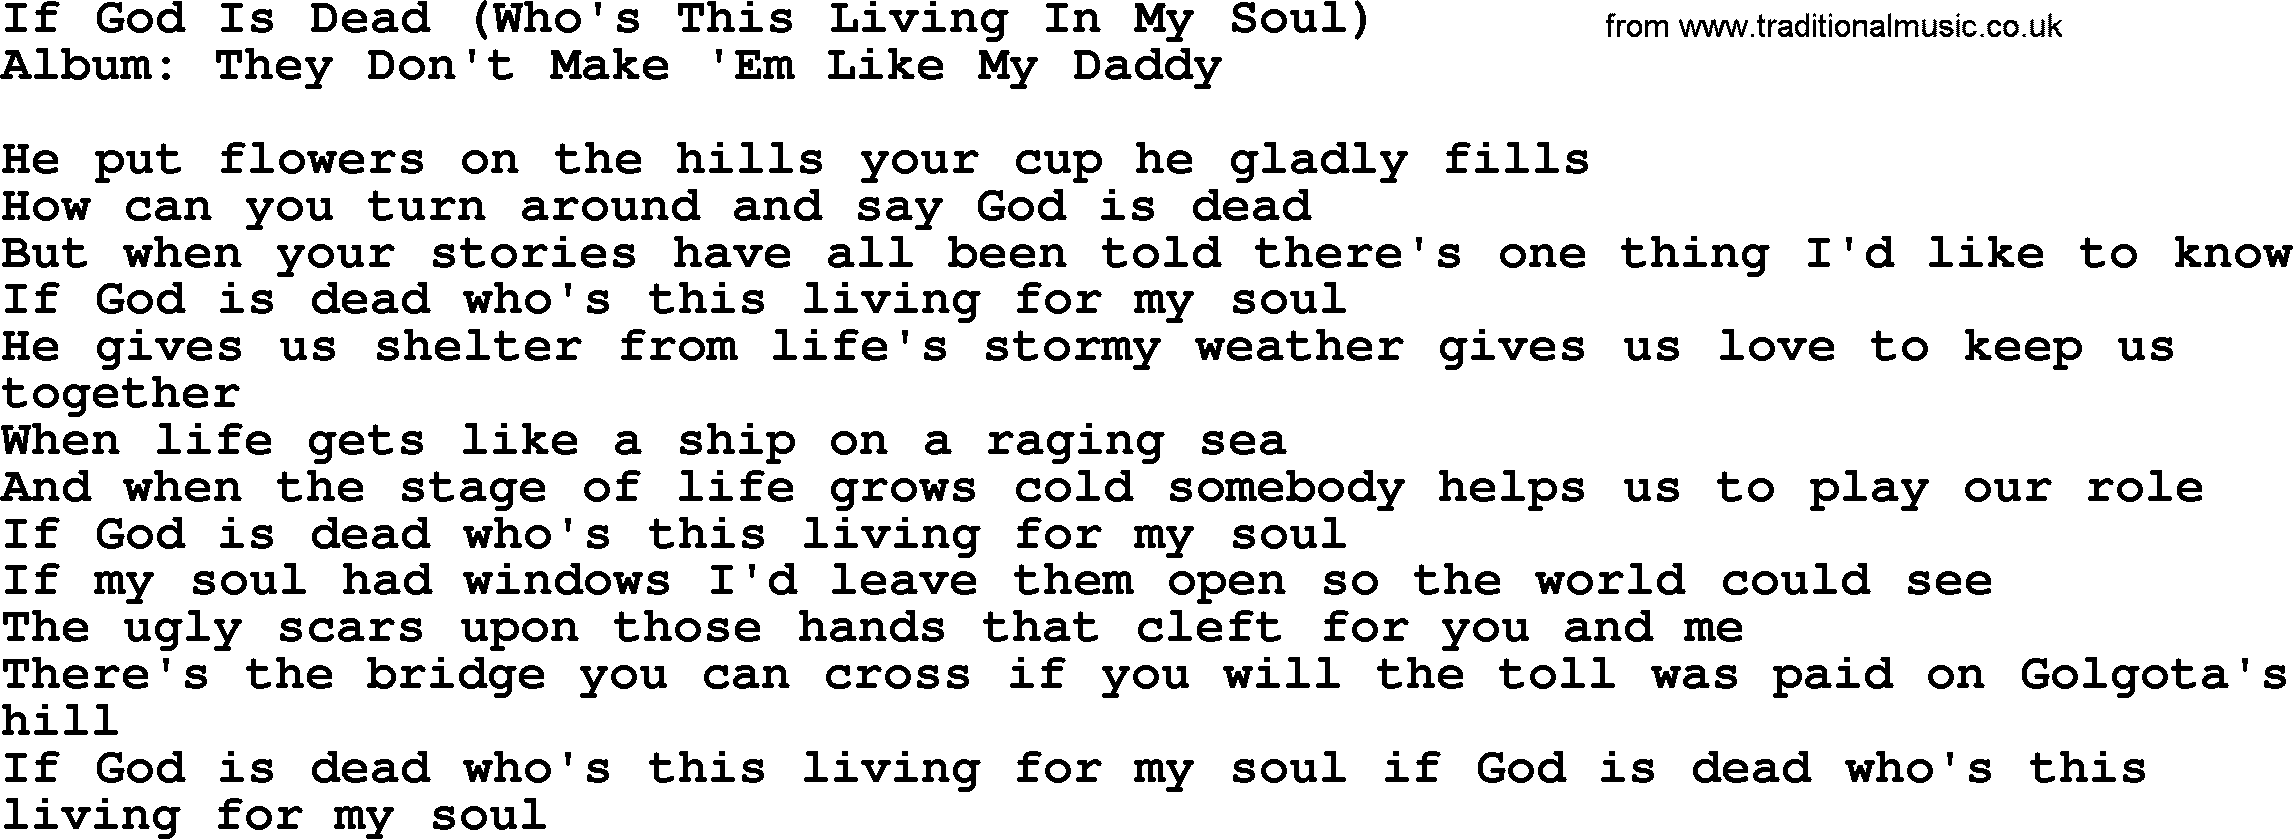 Loretta Lynn song: If God Is Dead (Who's This Living In My Soul) lyrics